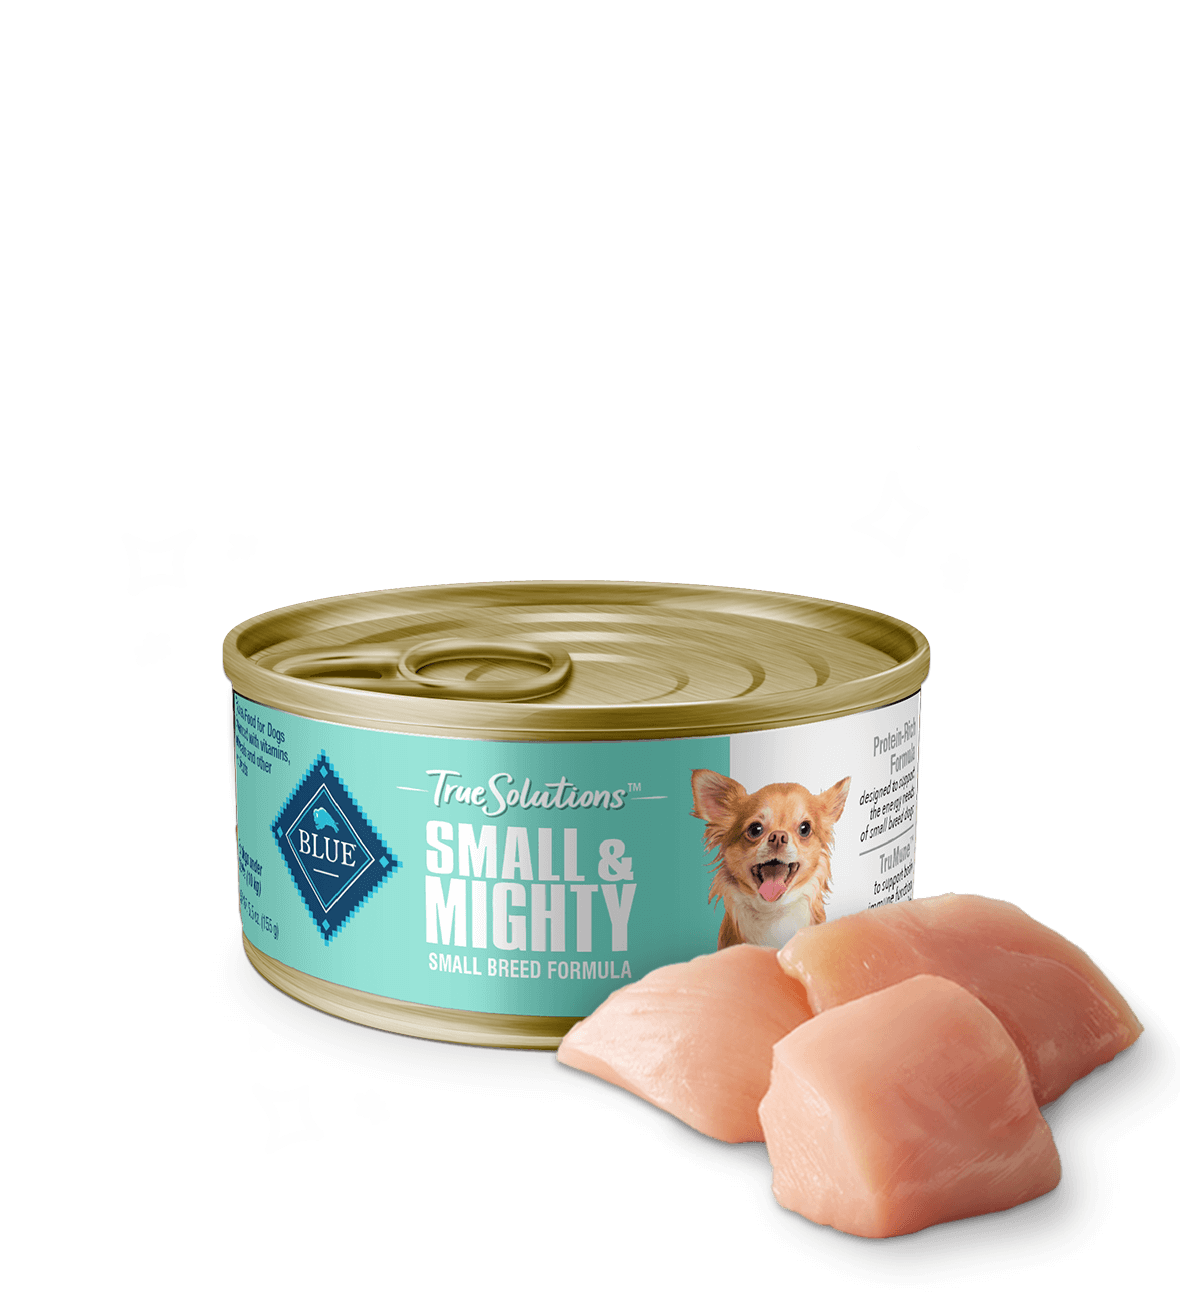 blue true solutions small & mighty small-breed formula dog wet food